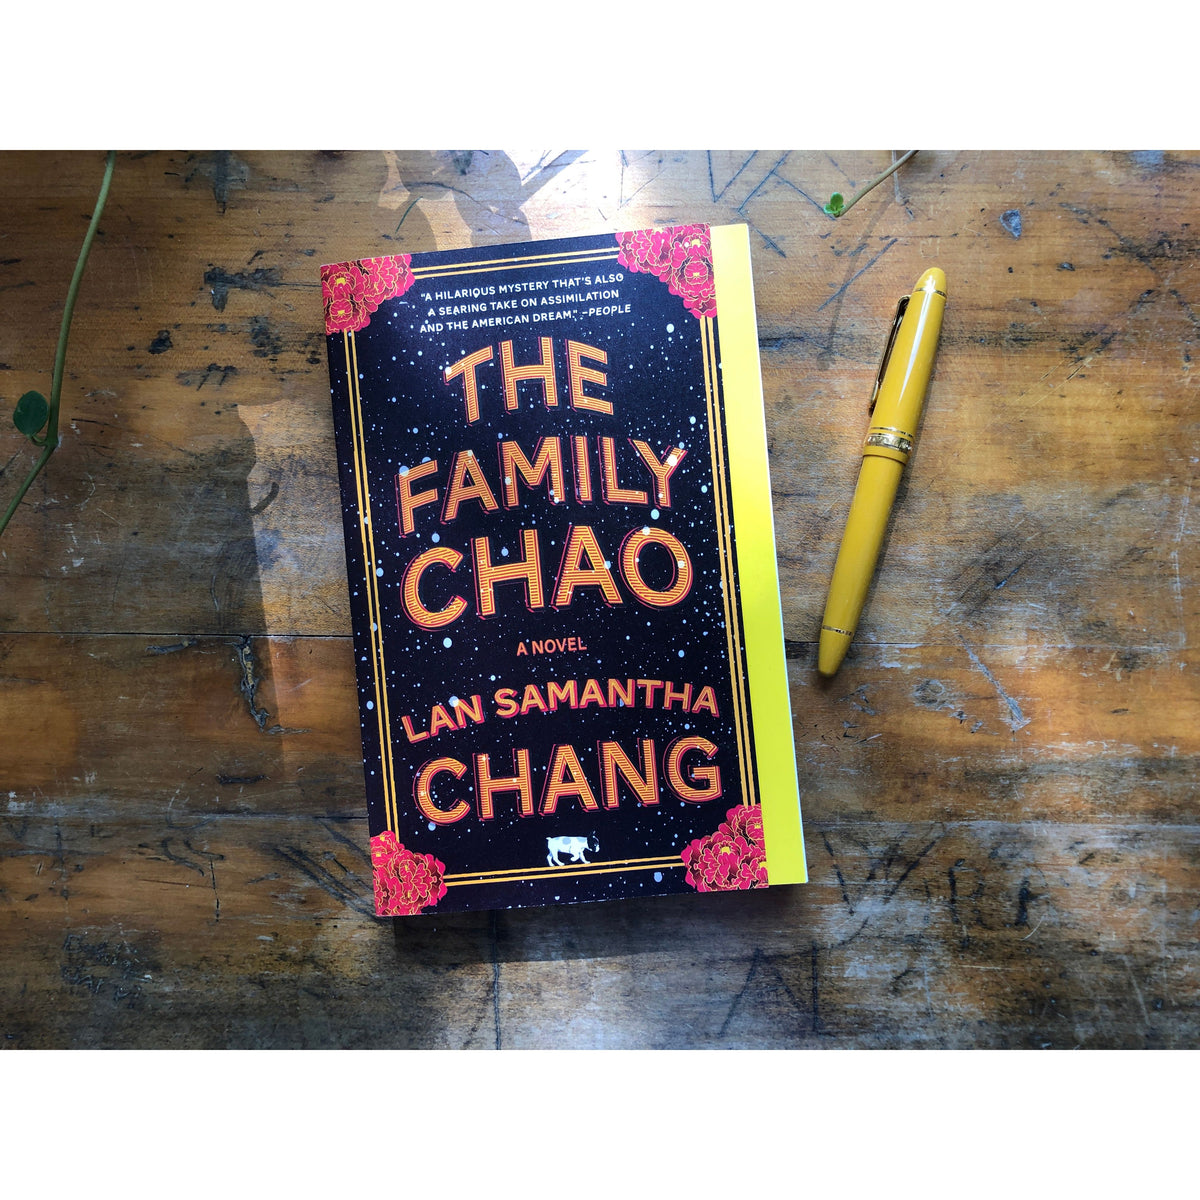 Book Review: The Family Chao by Lan Samantha Chang – Literary